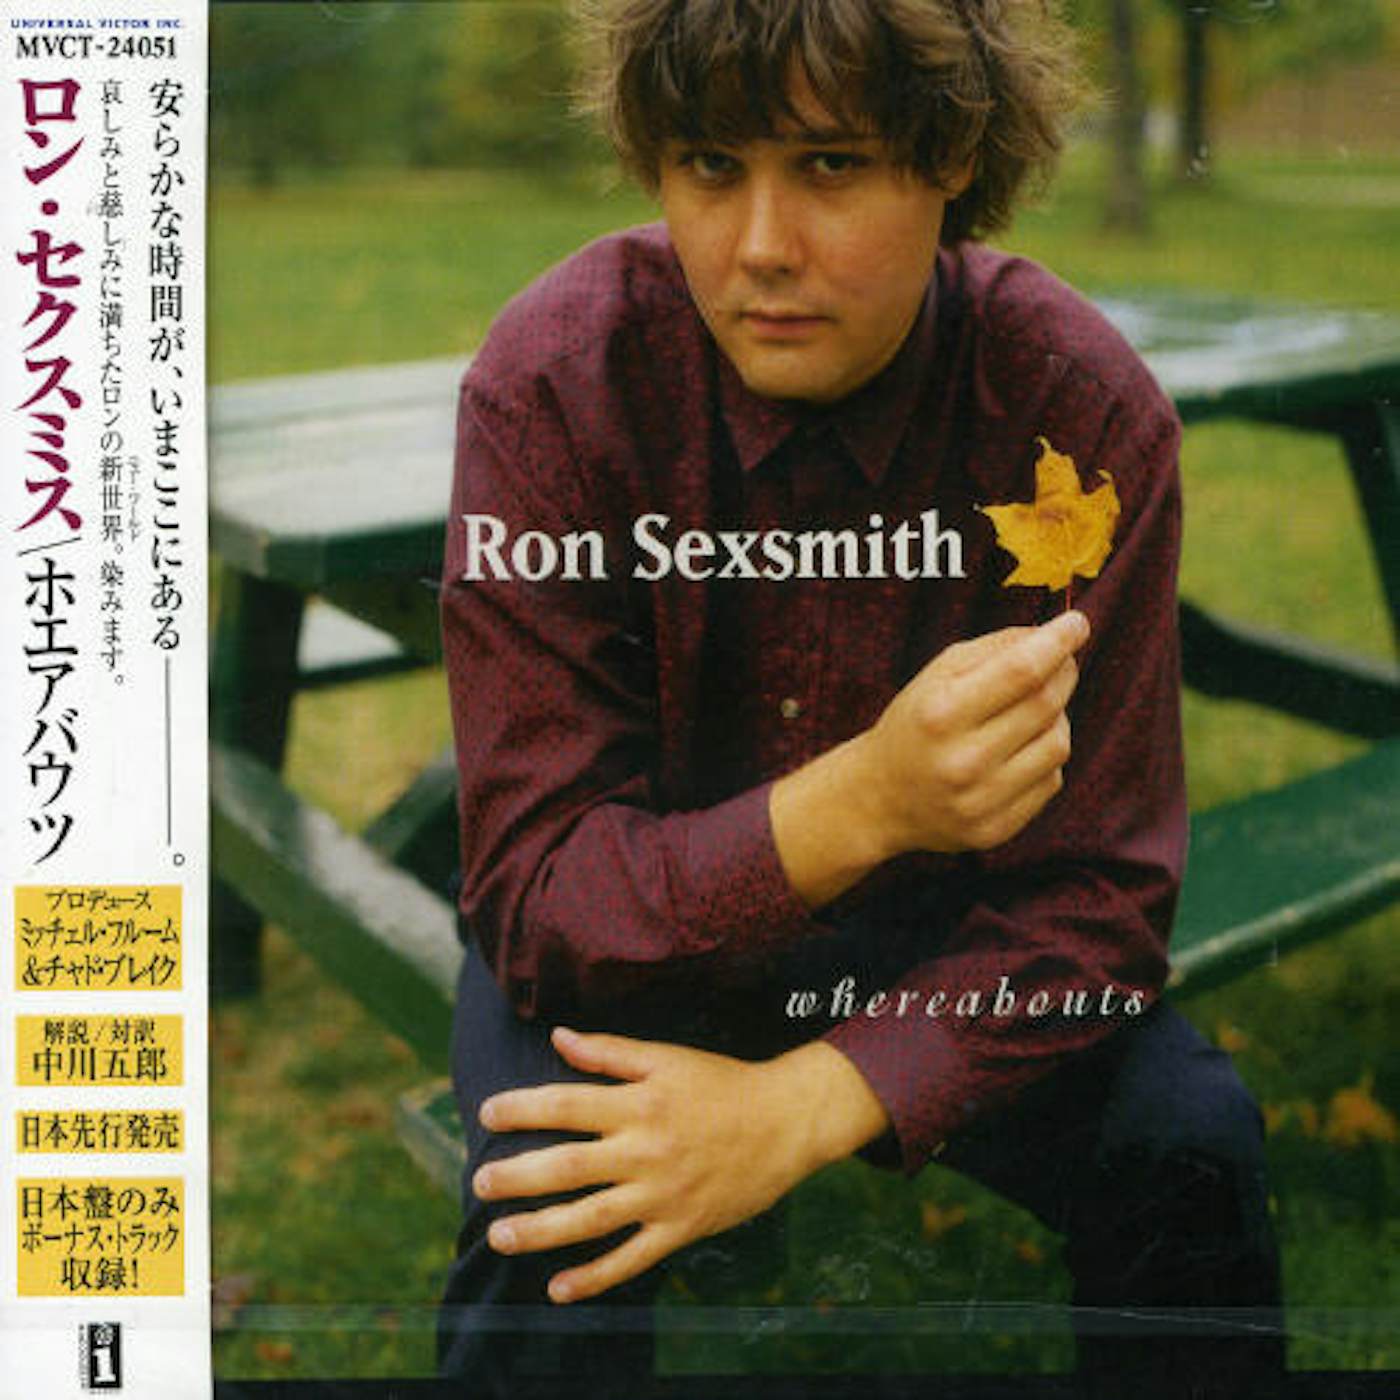 Ron Sexsmith WHEREABOUTS CD